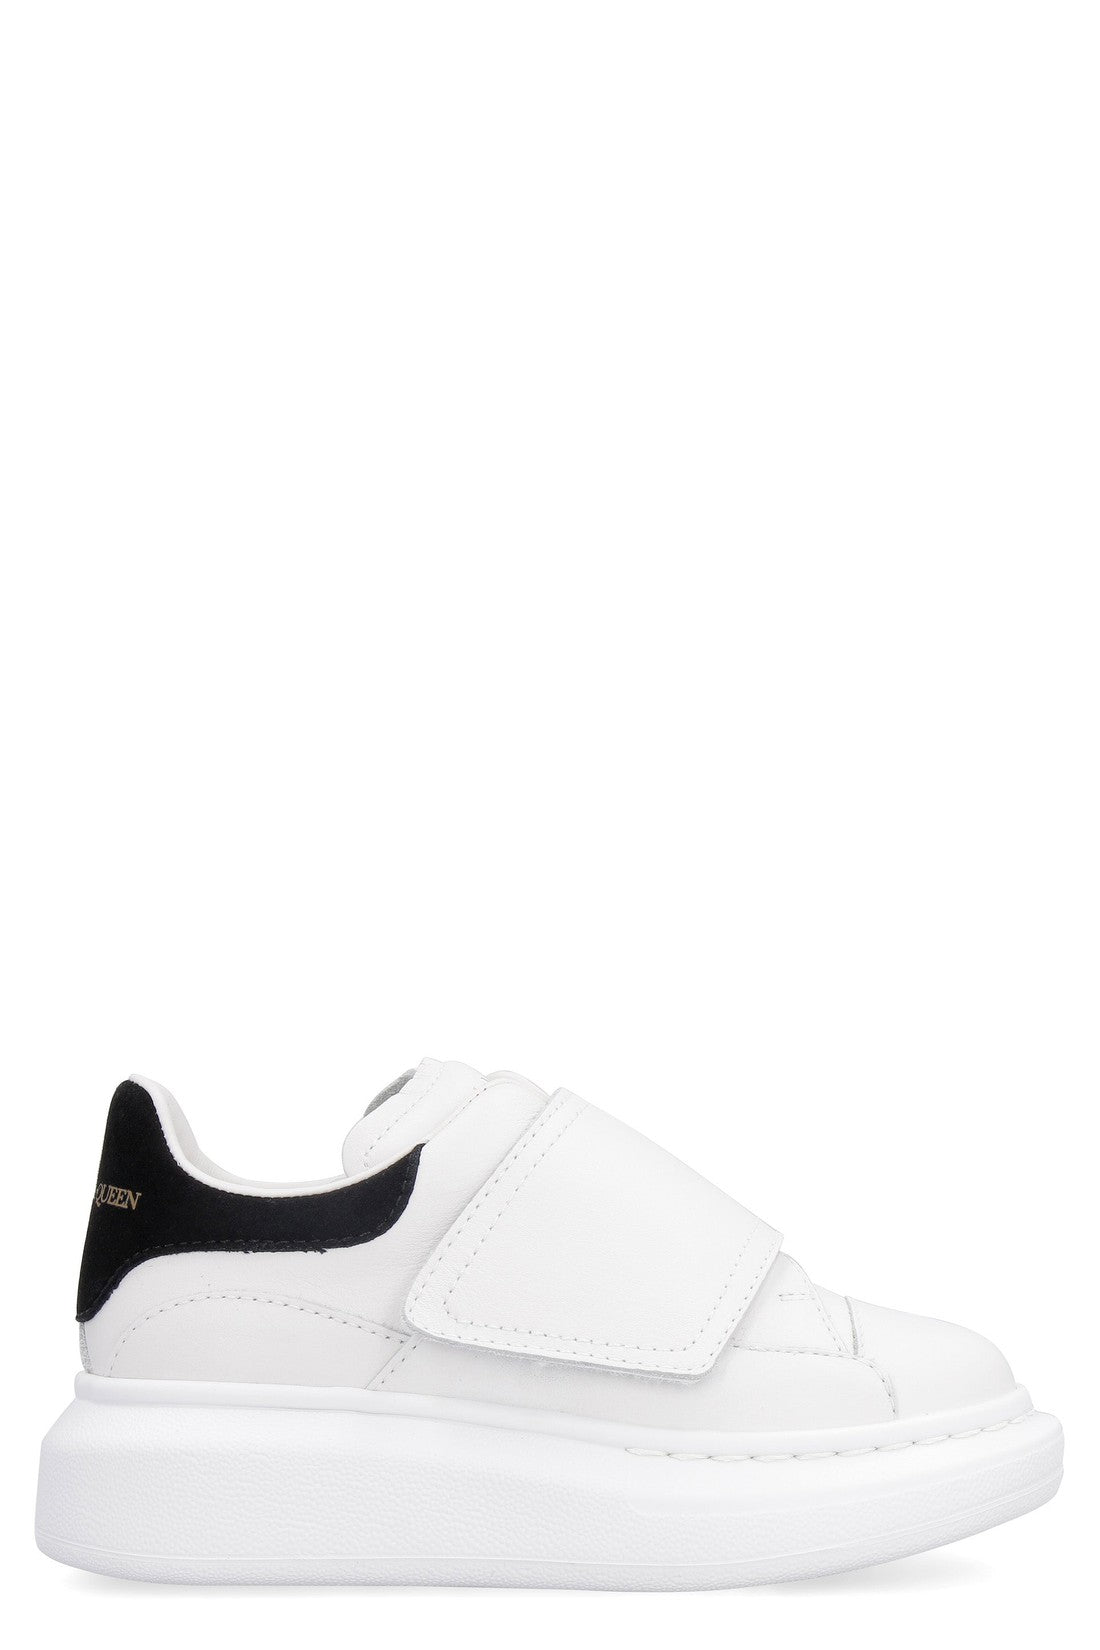 Piralo-OUTLET-SALE-Molly leather low-top sneakers-ARCHIVIST